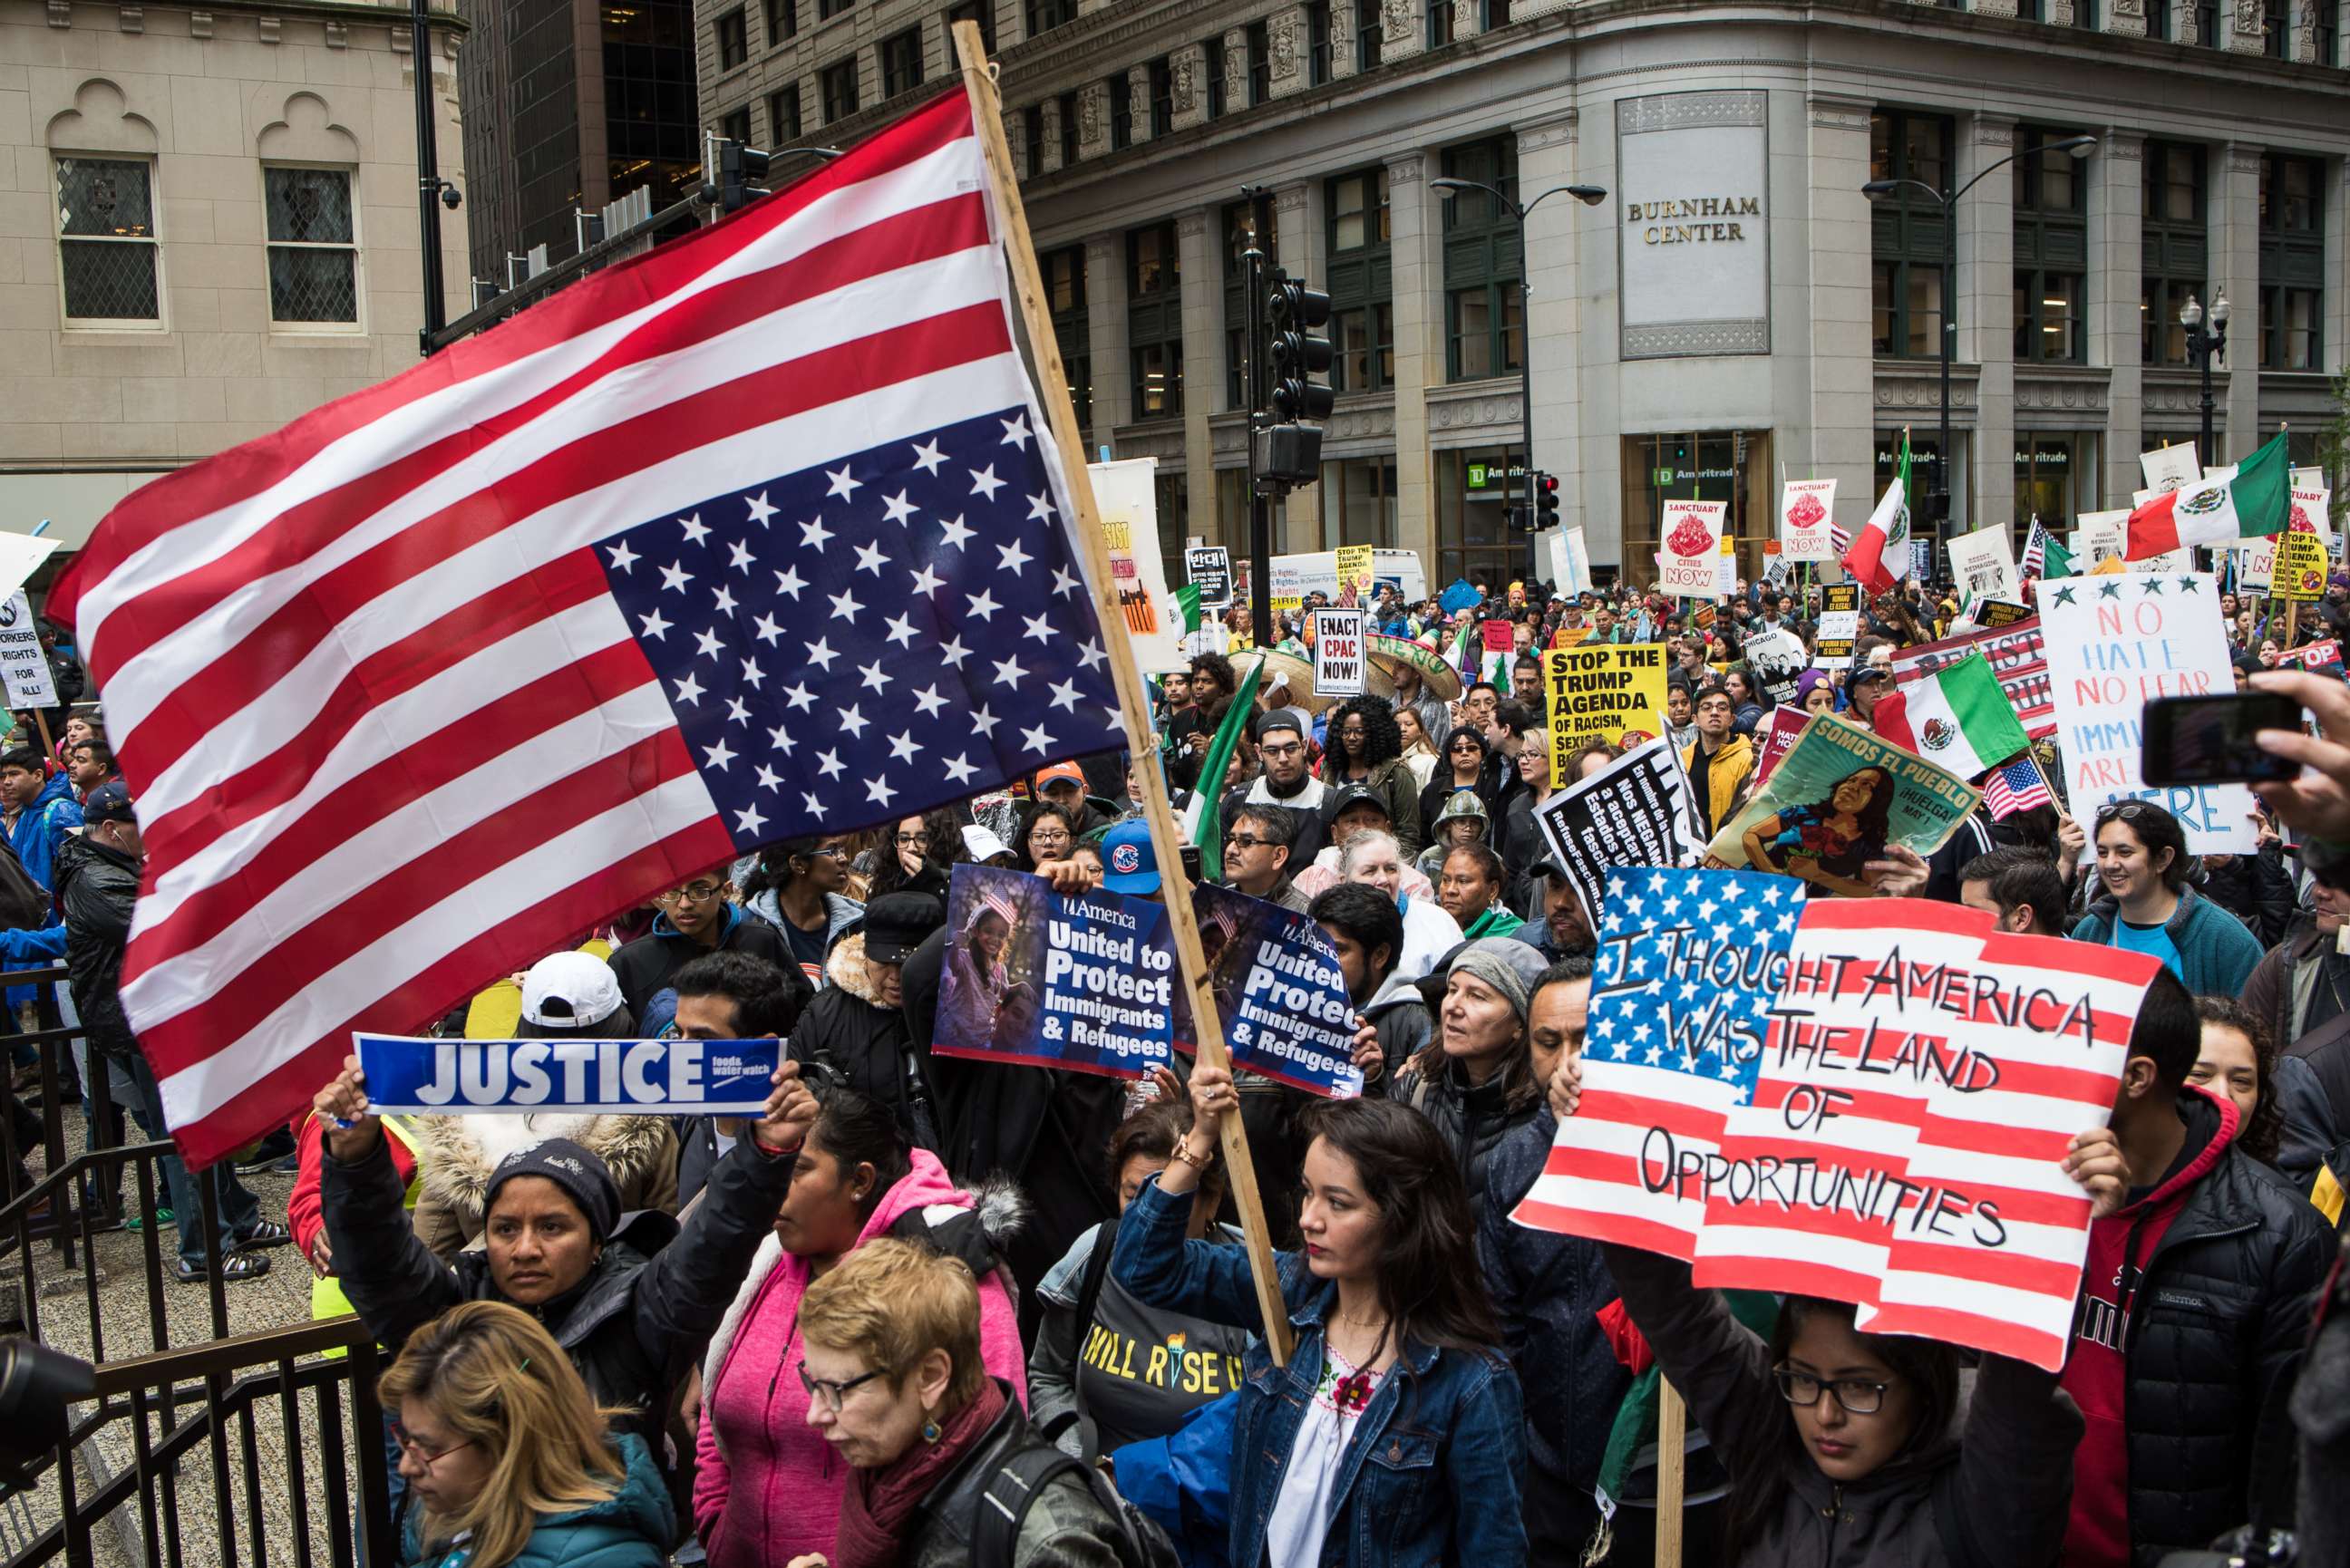 PHOTO: Demonstrators attend a May Day march in Chicago, May 1, 2017. Thousands gathered for May Day, also known as International Workers' Day, in support of worker and immigrant rights.